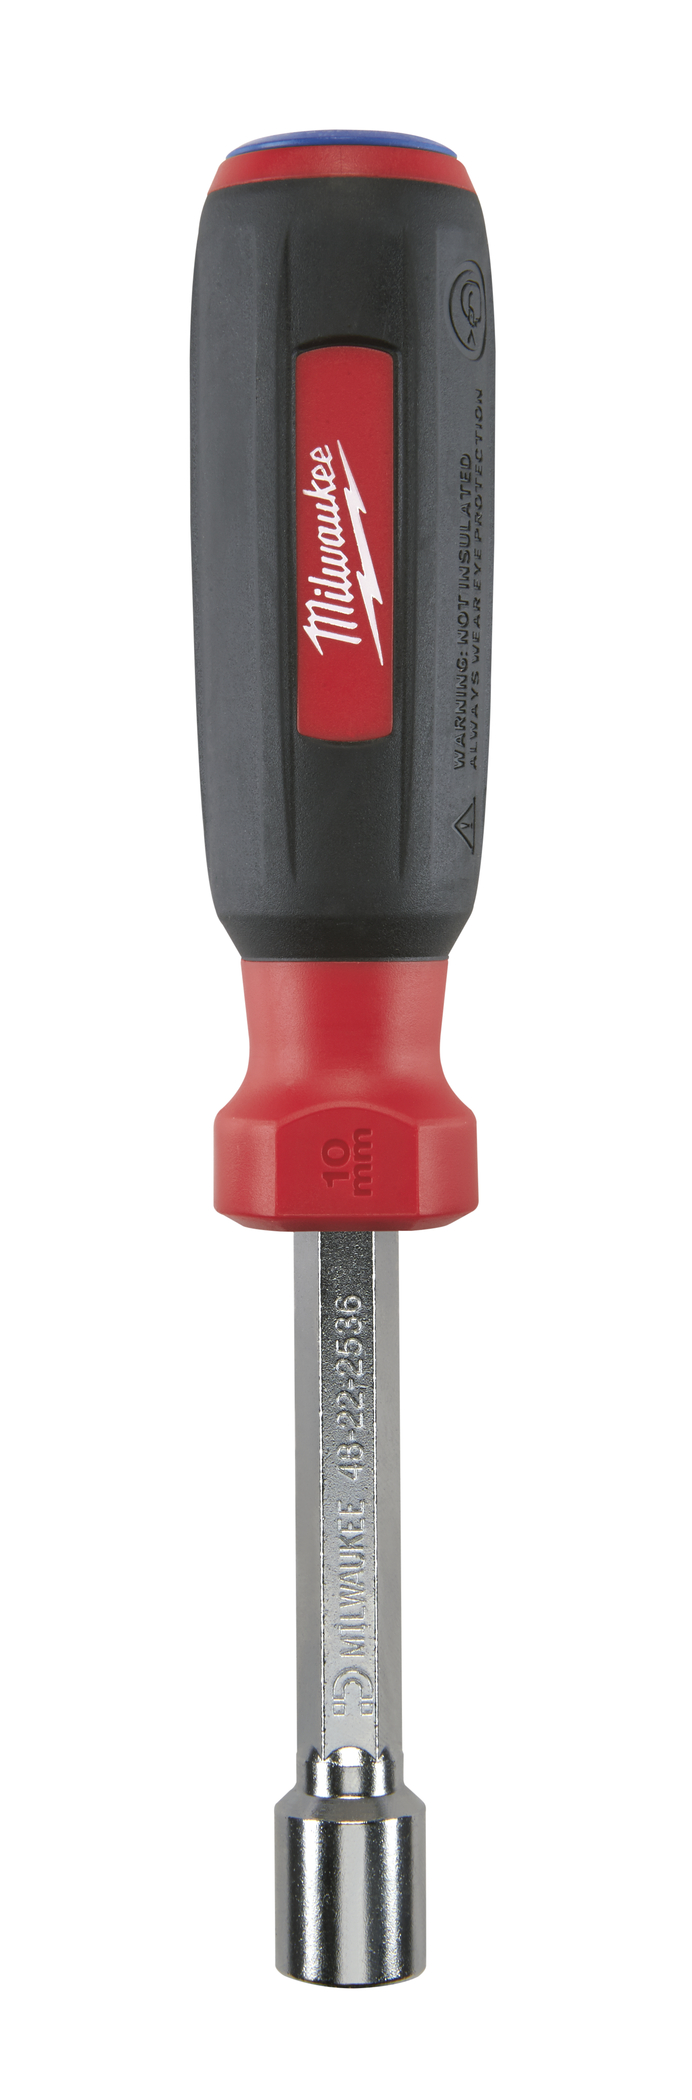 10 mm HollowCore Magnetic Nut Driver